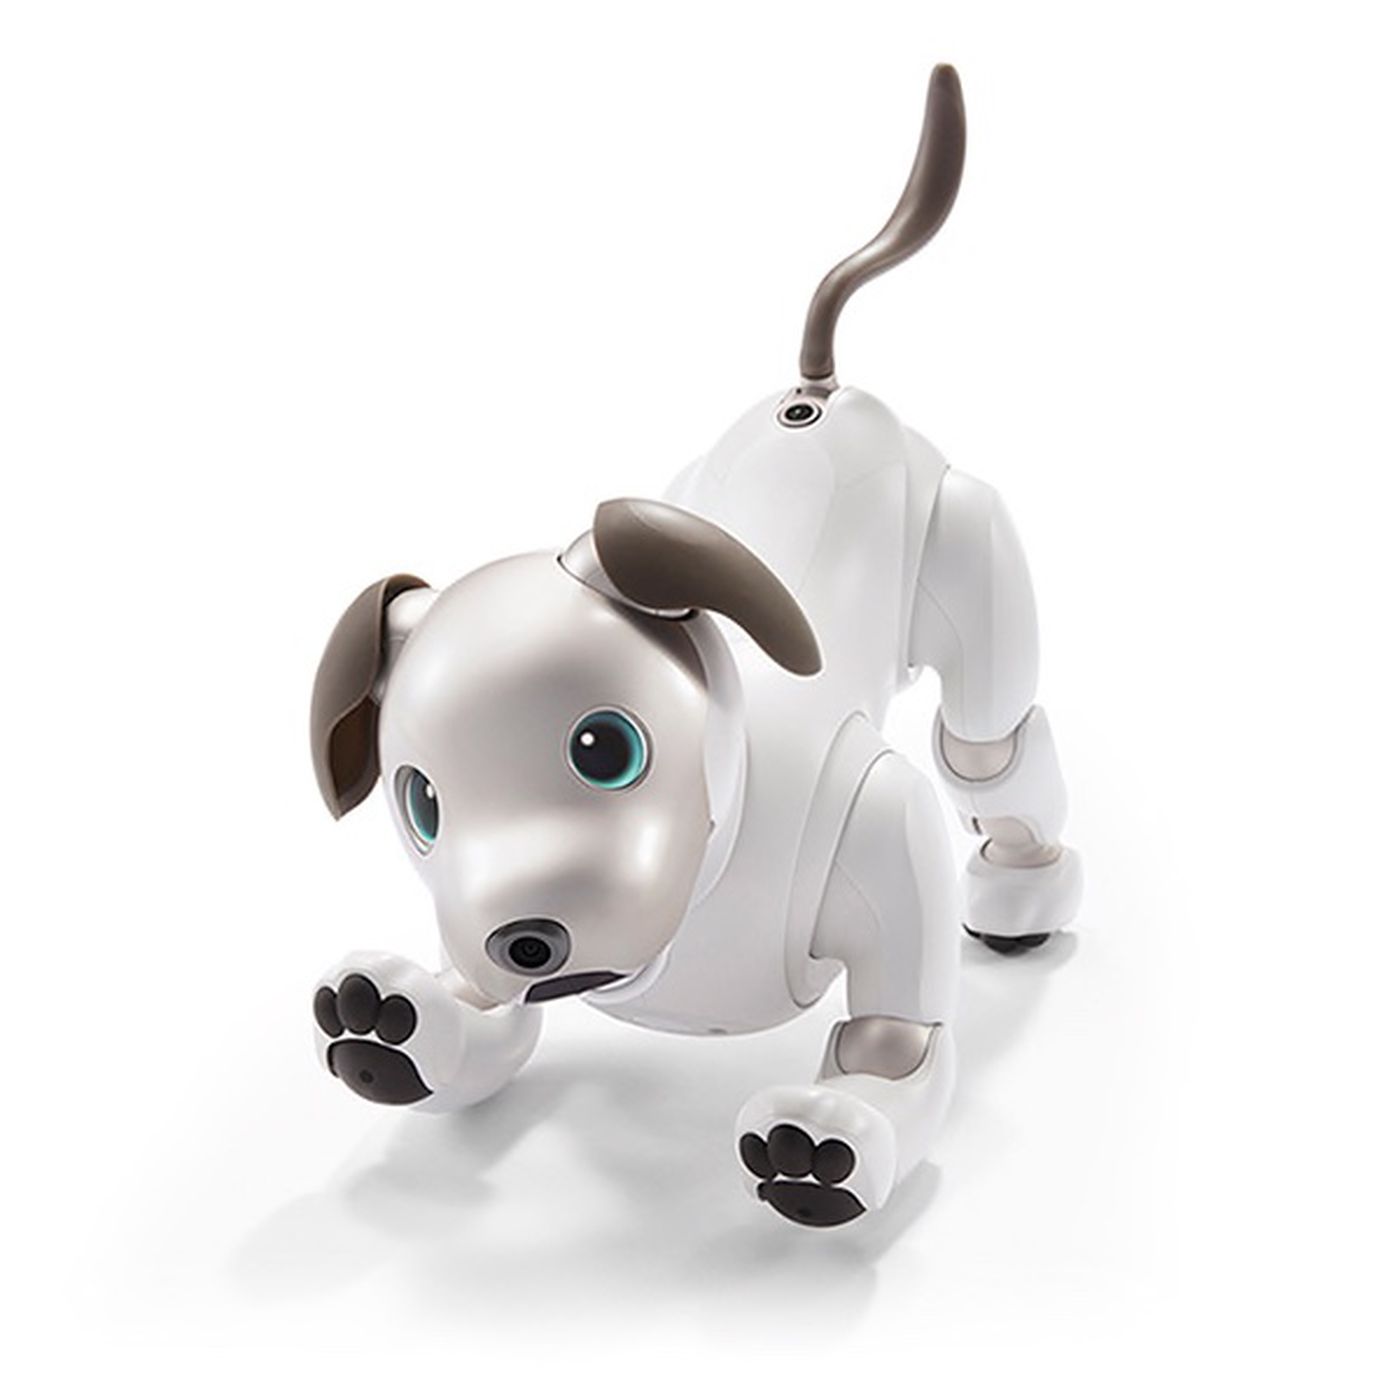 With New Apis Sony S Robot Dog Could Be The Smart Home Assistant